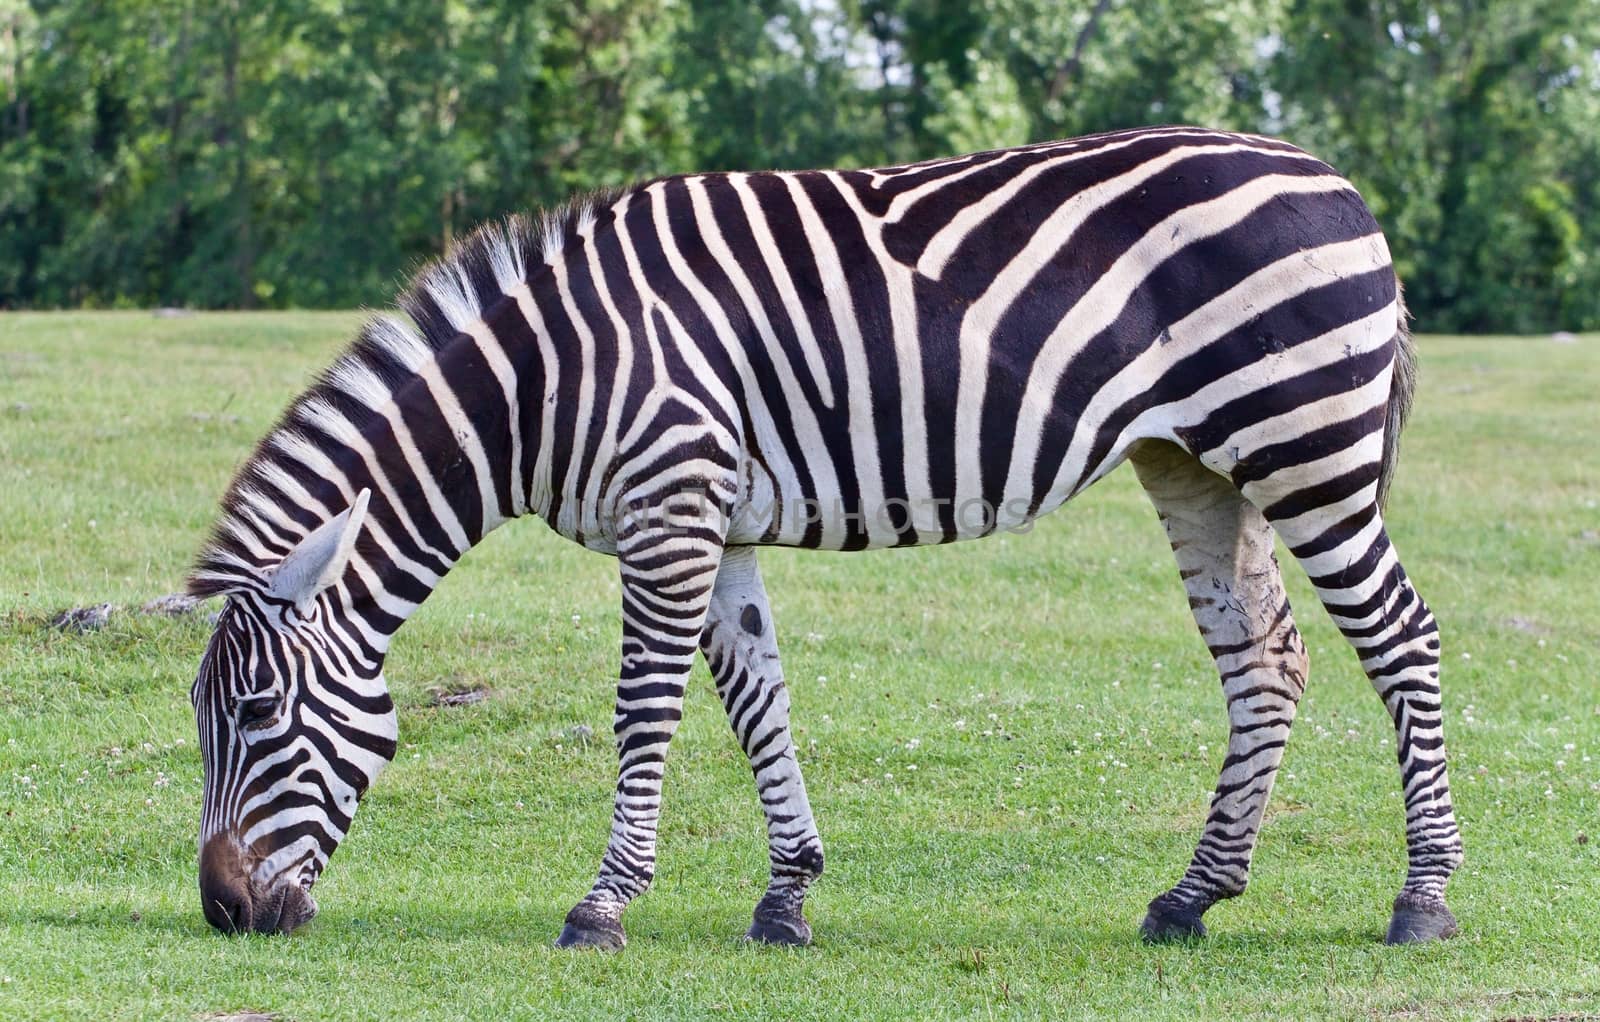 Image of a zebra eating the grass on a field